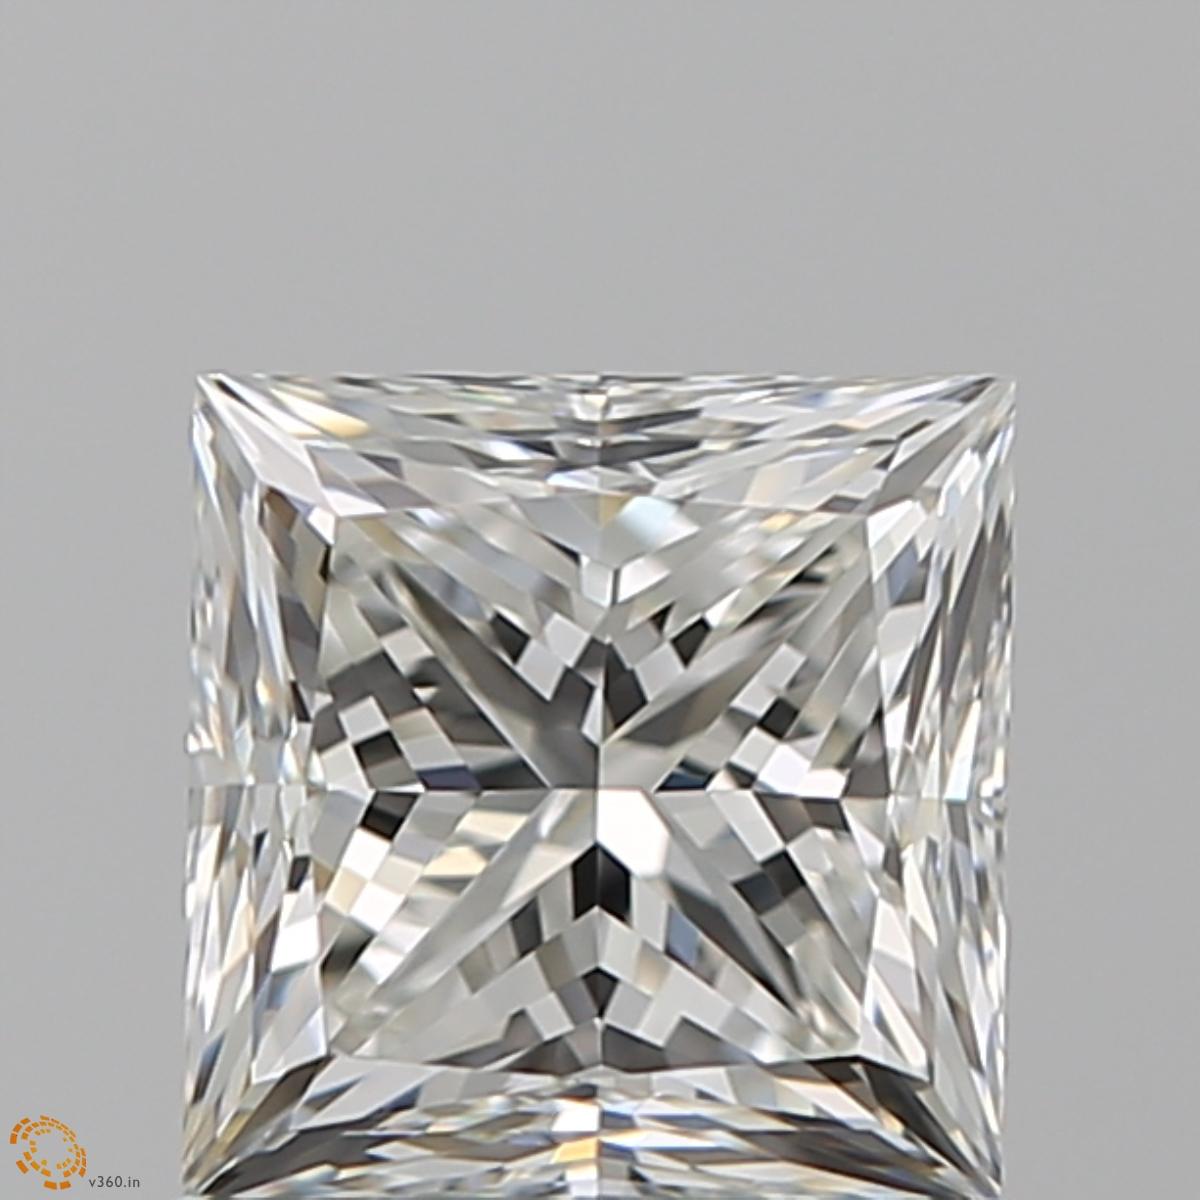 1.00 ct, H/VS1, Princess cut Diamond, 50% off Rapaport List Price (GIA Graded), Unmounted. Appraised